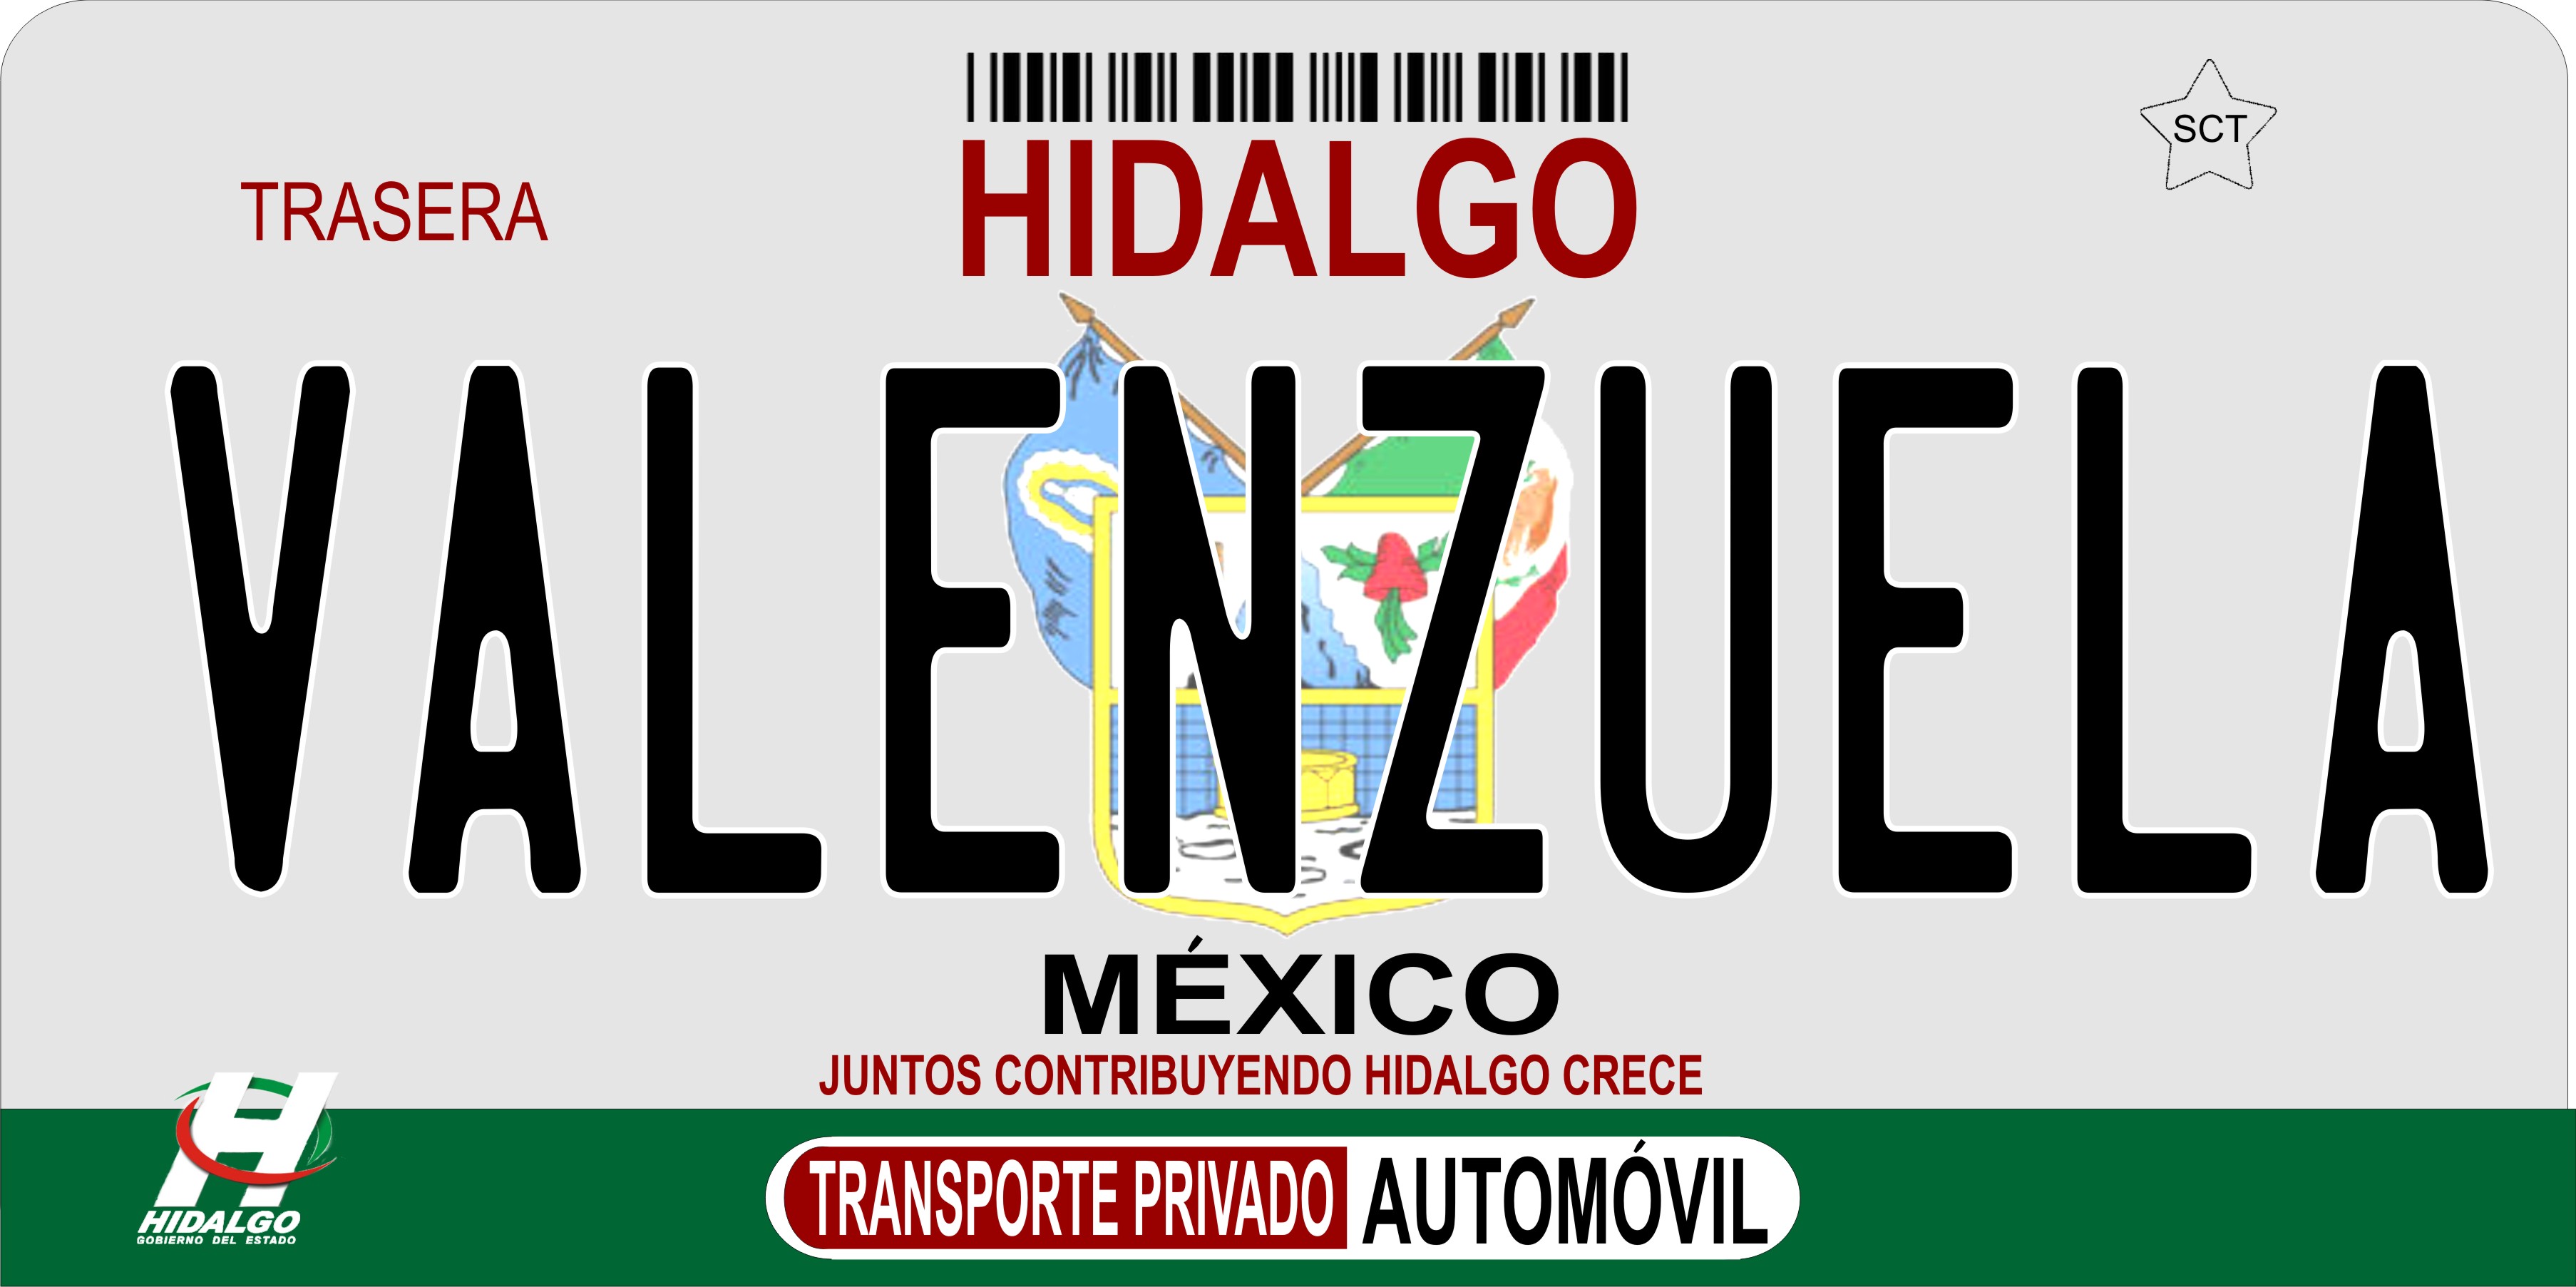 Mexico Hidalgo Photo LICENSE PLATE  Free Personalization on this PLATE